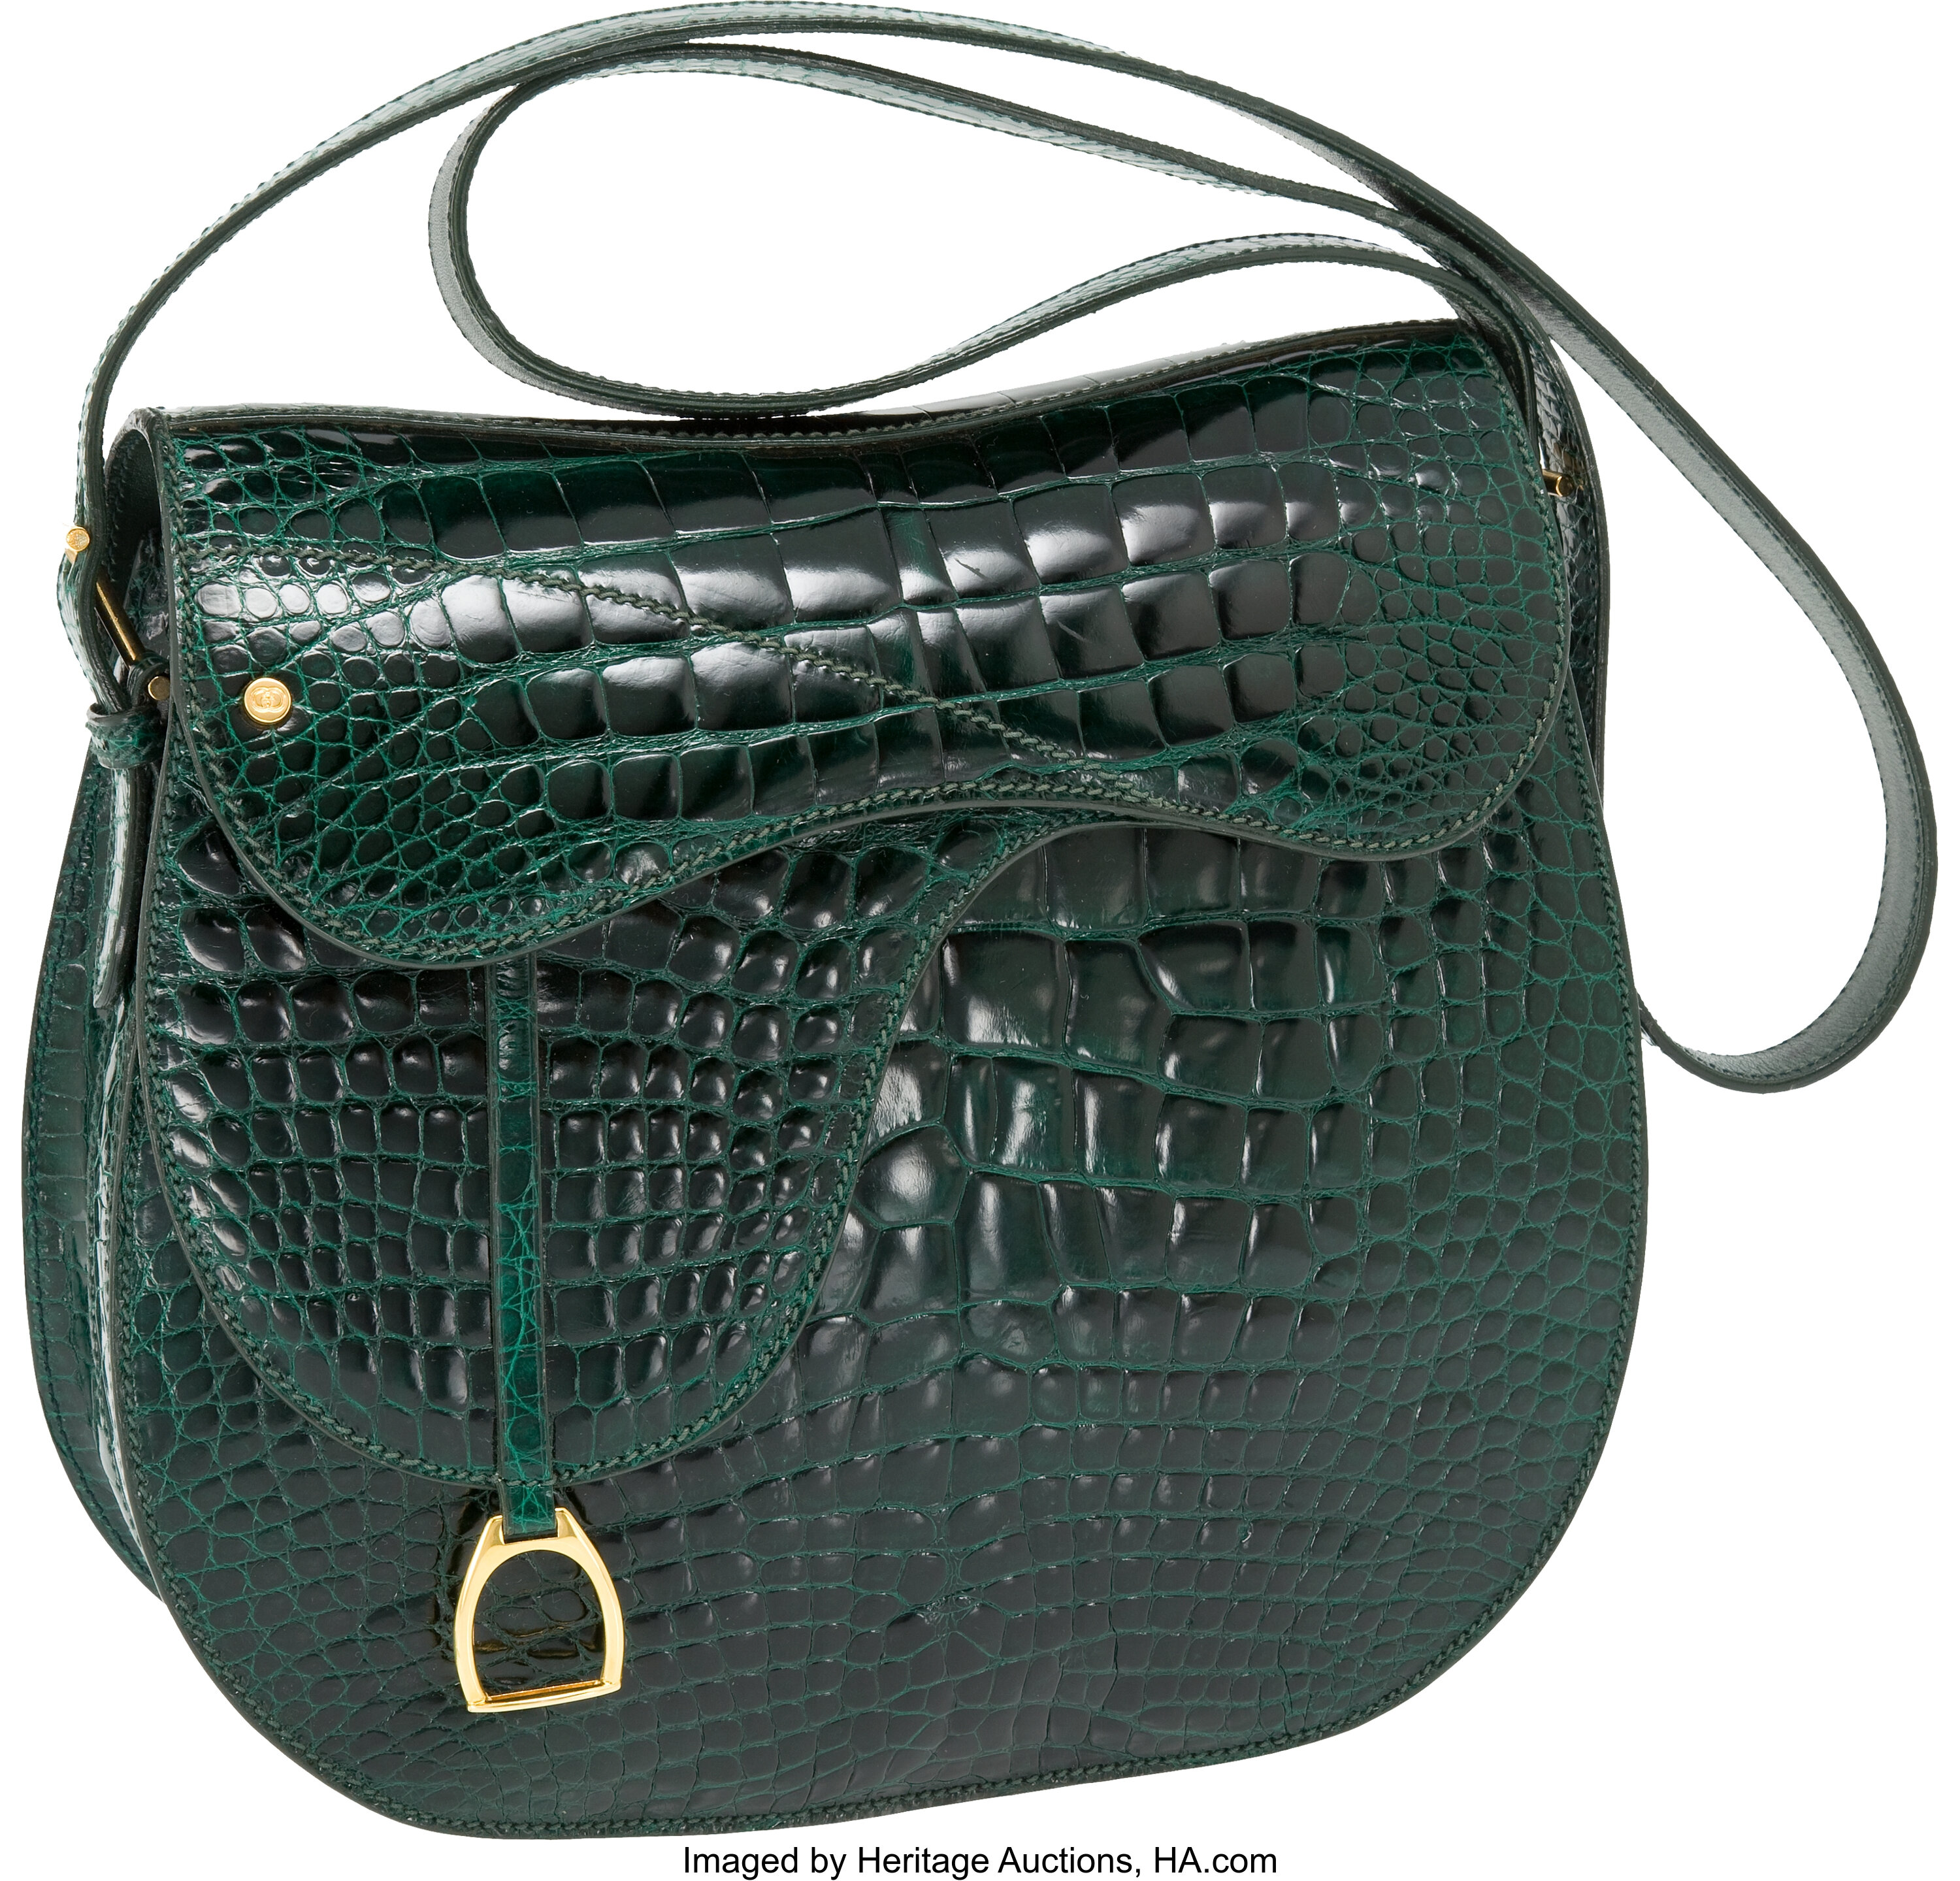 Gucci 1970's Very Special Shiny Emerald Green Crocodile Saddle Bag | Lot  #56181 | Heritage Auctions